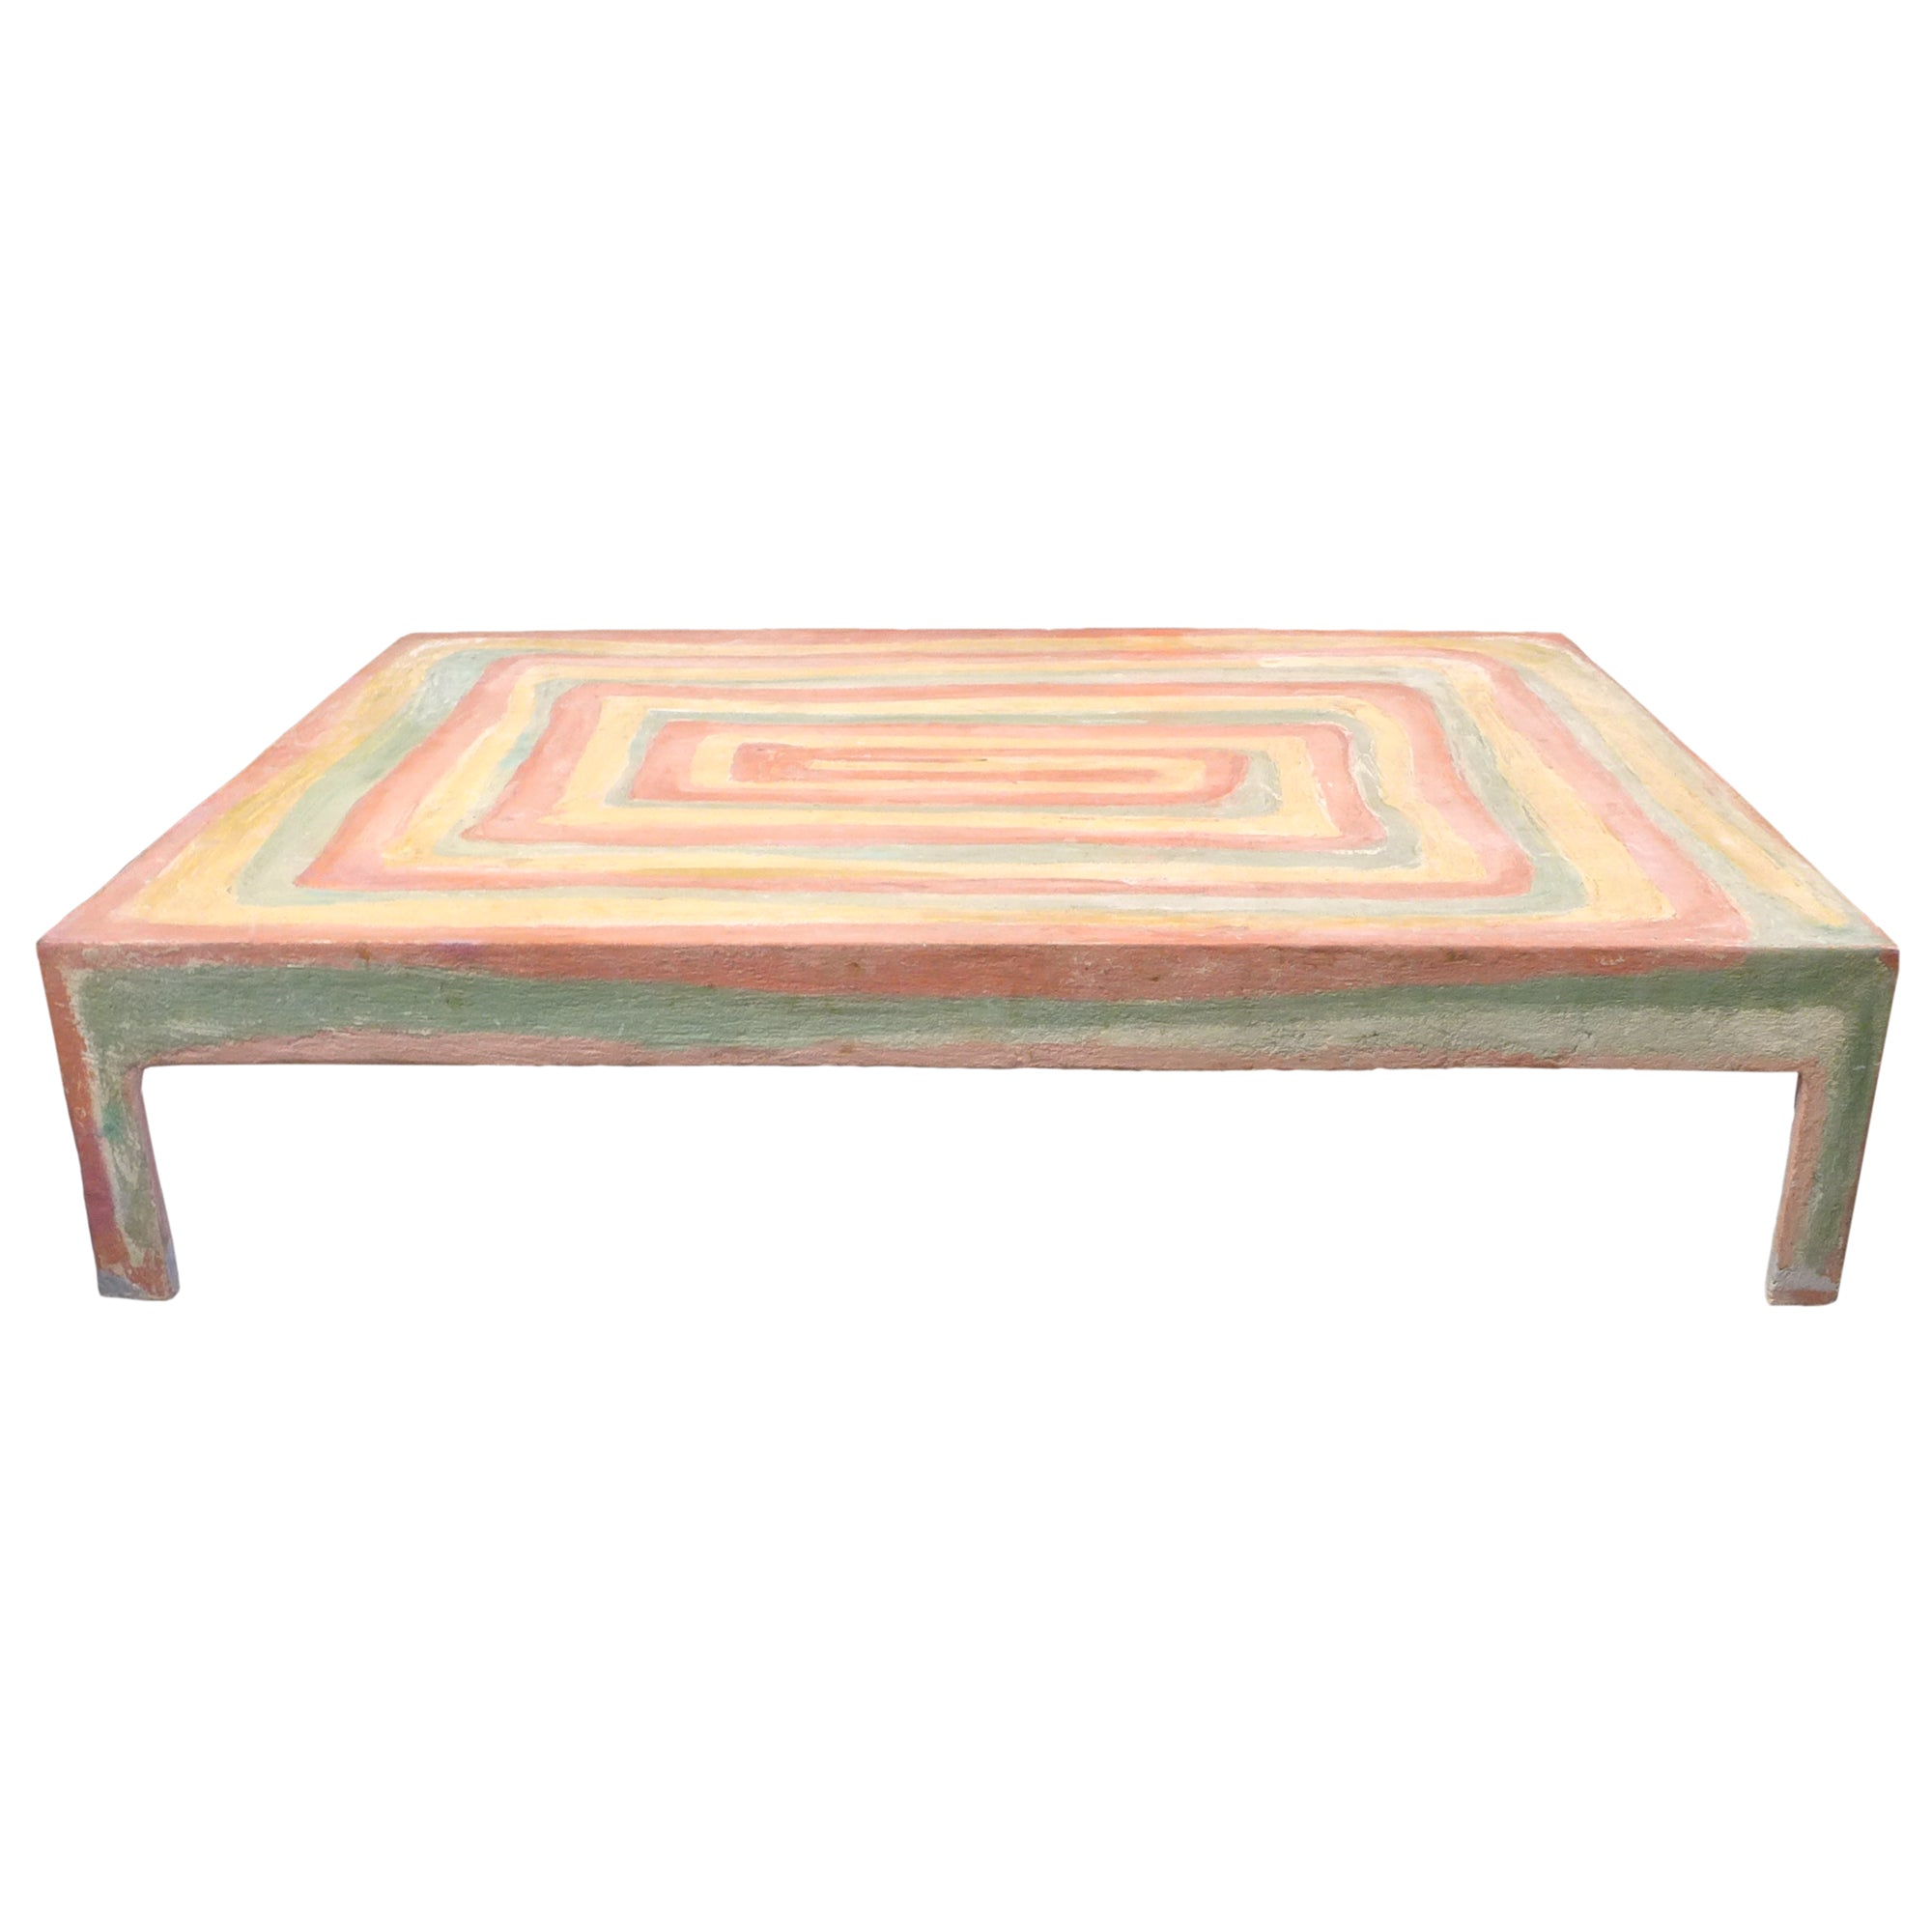 Low Hand-Painted Spiral Coffee Table by Audrey Hemenway